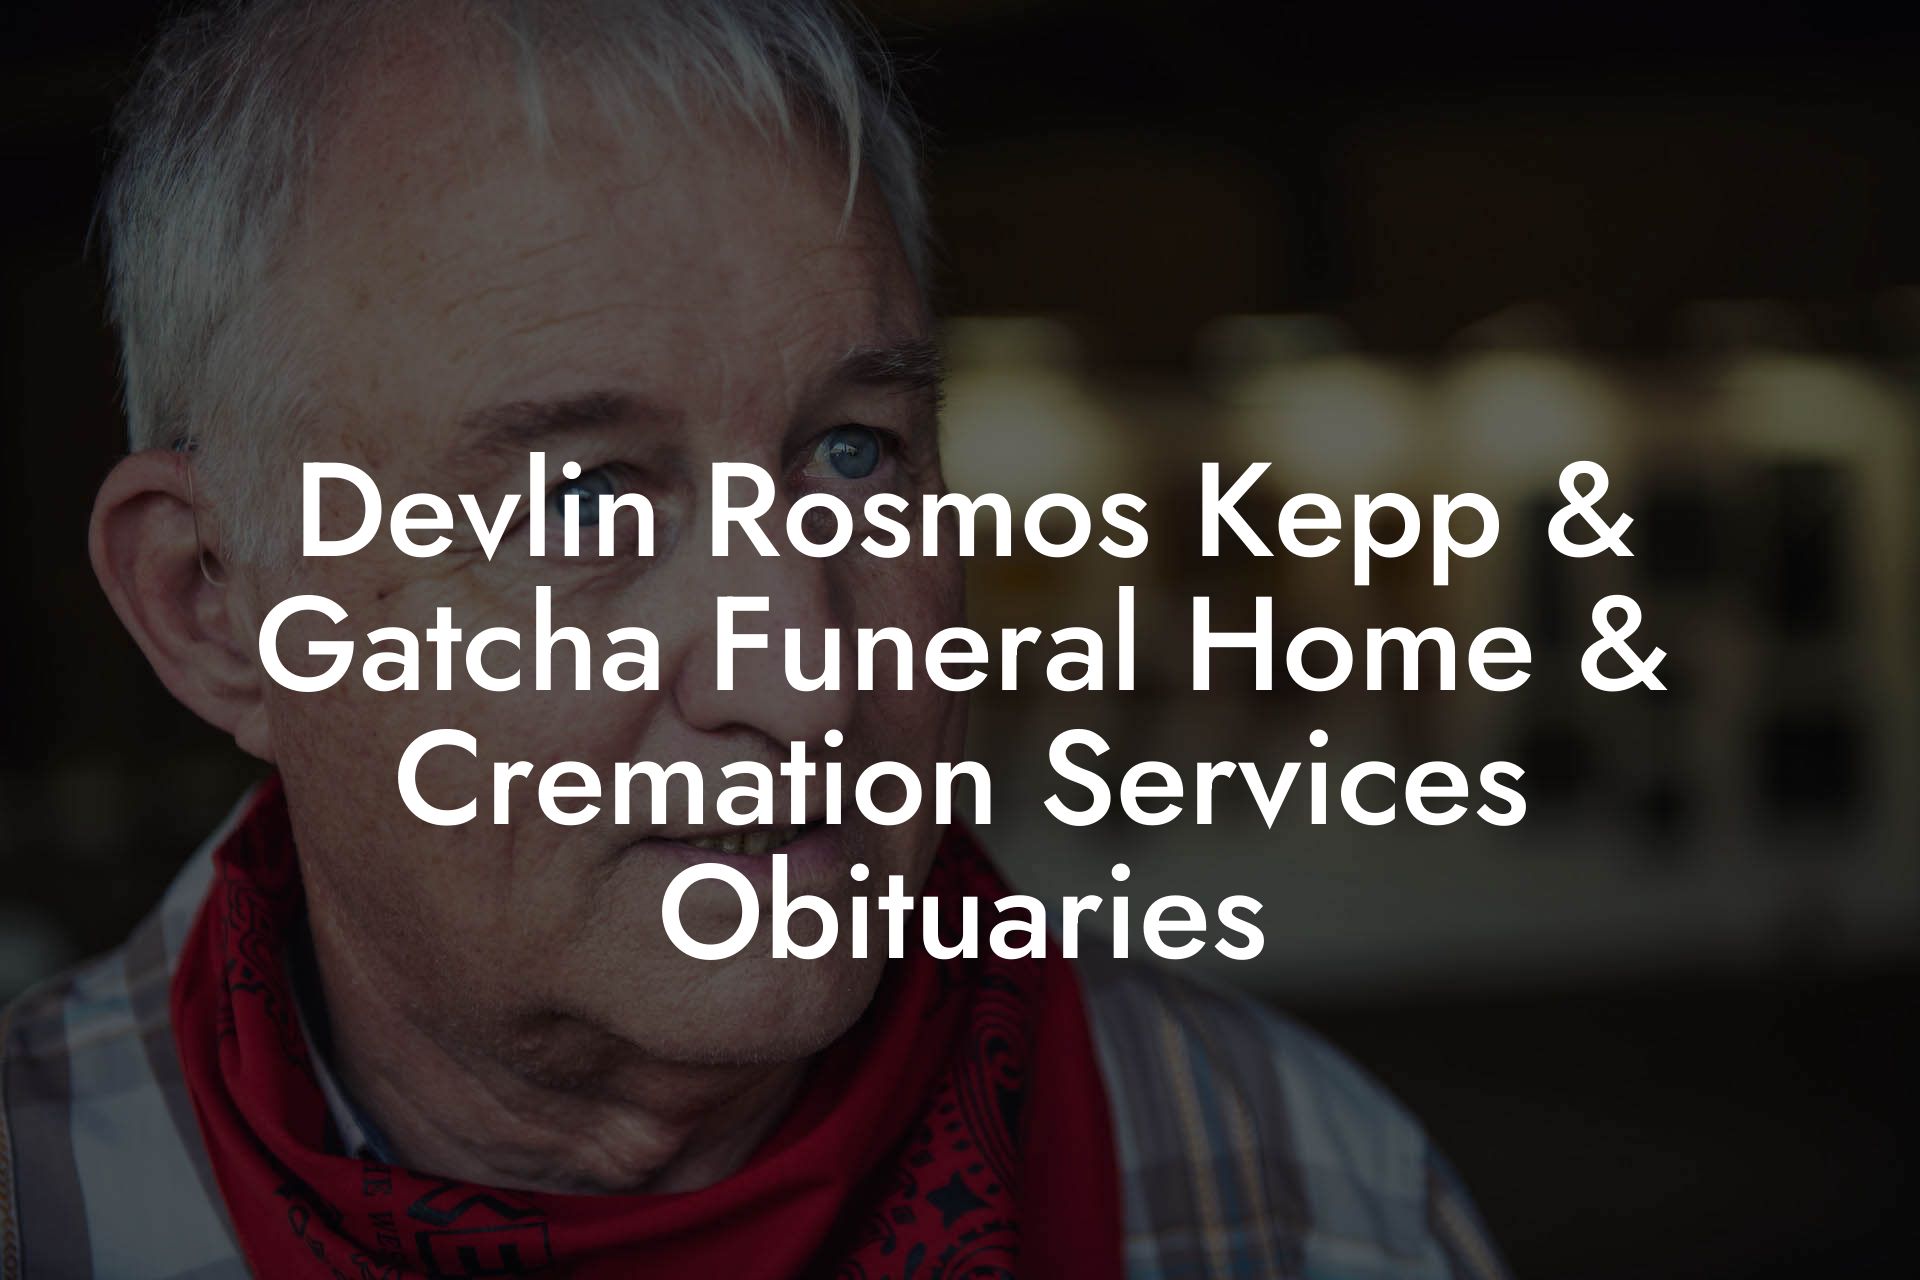 Devlin Rosmos Kepp & Gatcha Funeral Home & Cremation Services Obituaries